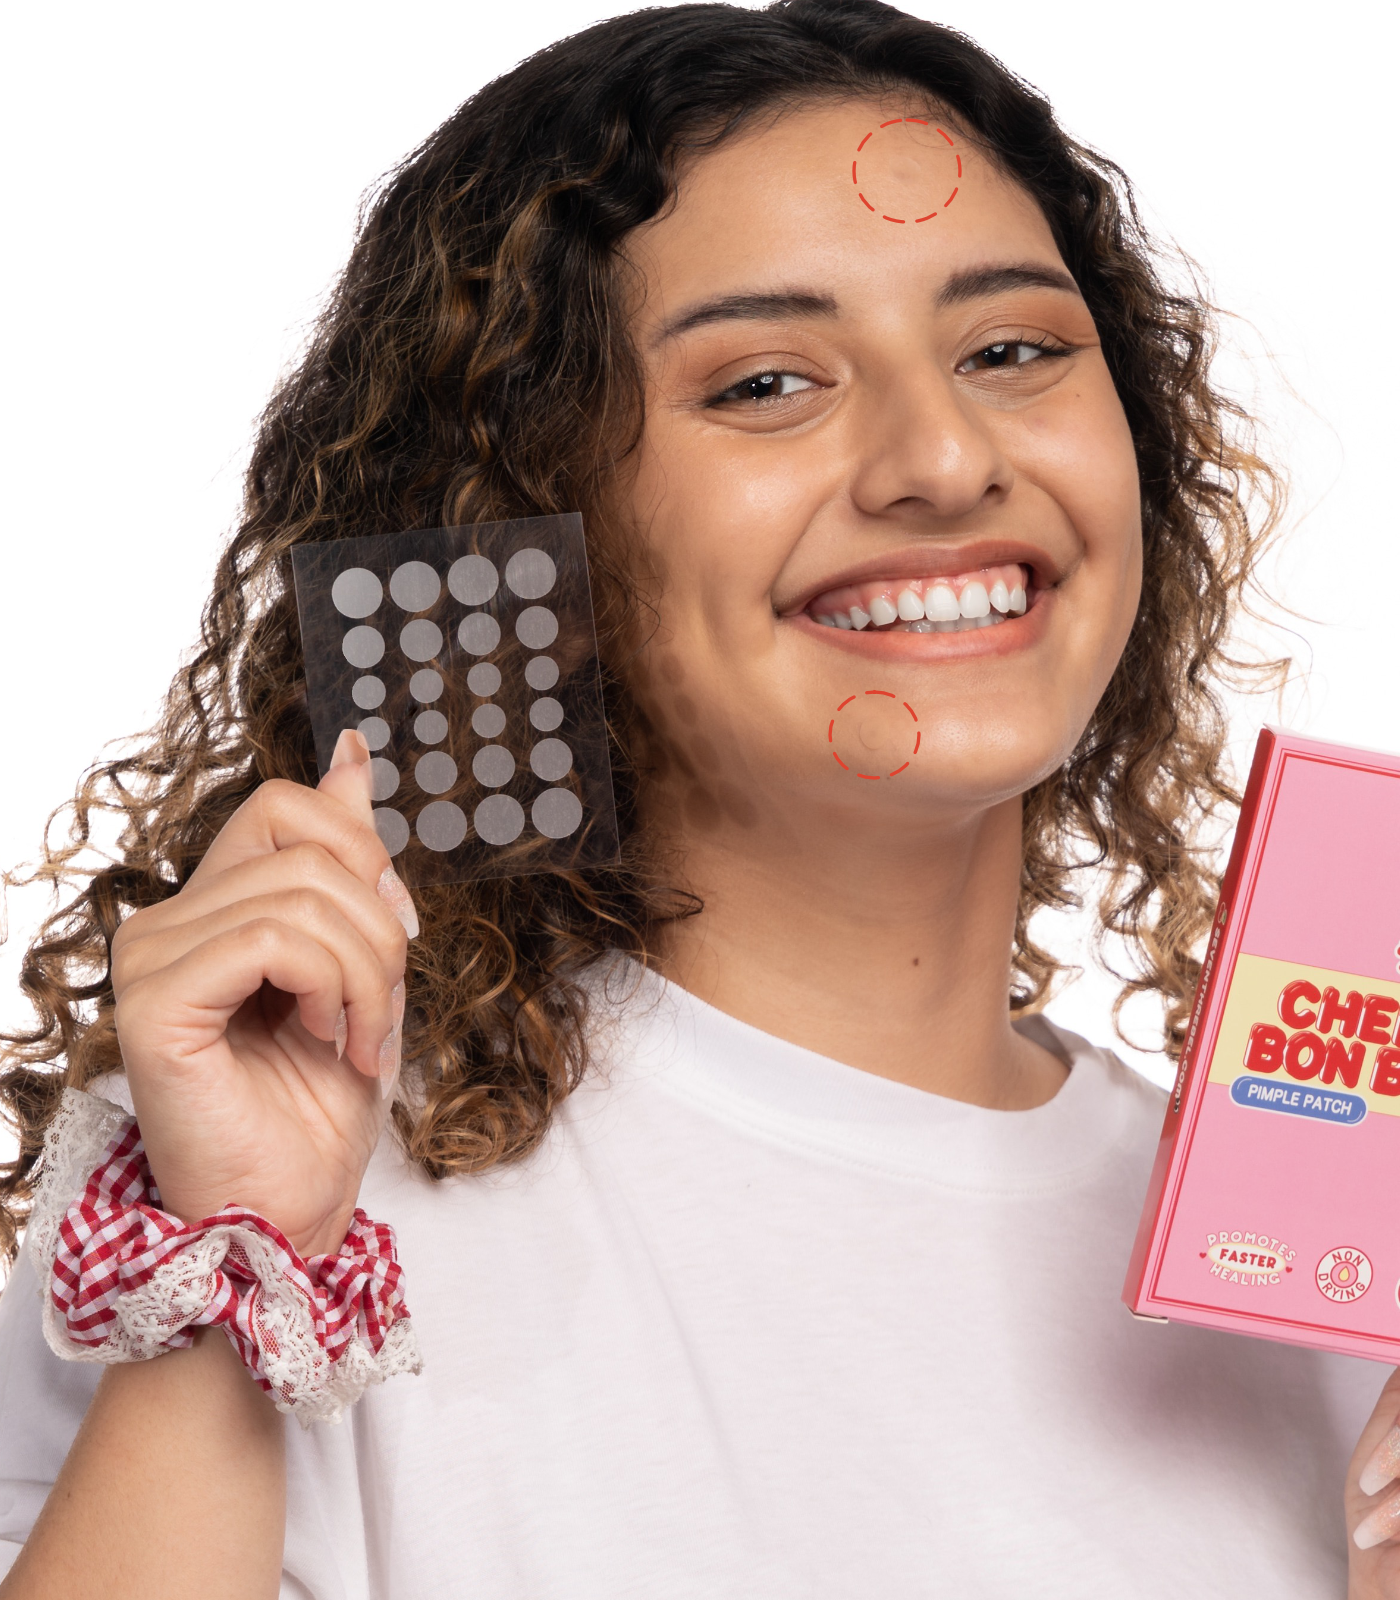 SEVENTH REBEL Cherry Bon Bons Original Pimple Patch - Invisible Hydrocolloid Acne Patches for Spot Treatment, Covering Blemishes and Zits - For Face and All Skin Types, Non Drying, Fast Healing, Not Tested on Animals, Vegan friendly and Non toxic with 3 Sizes (48 count)